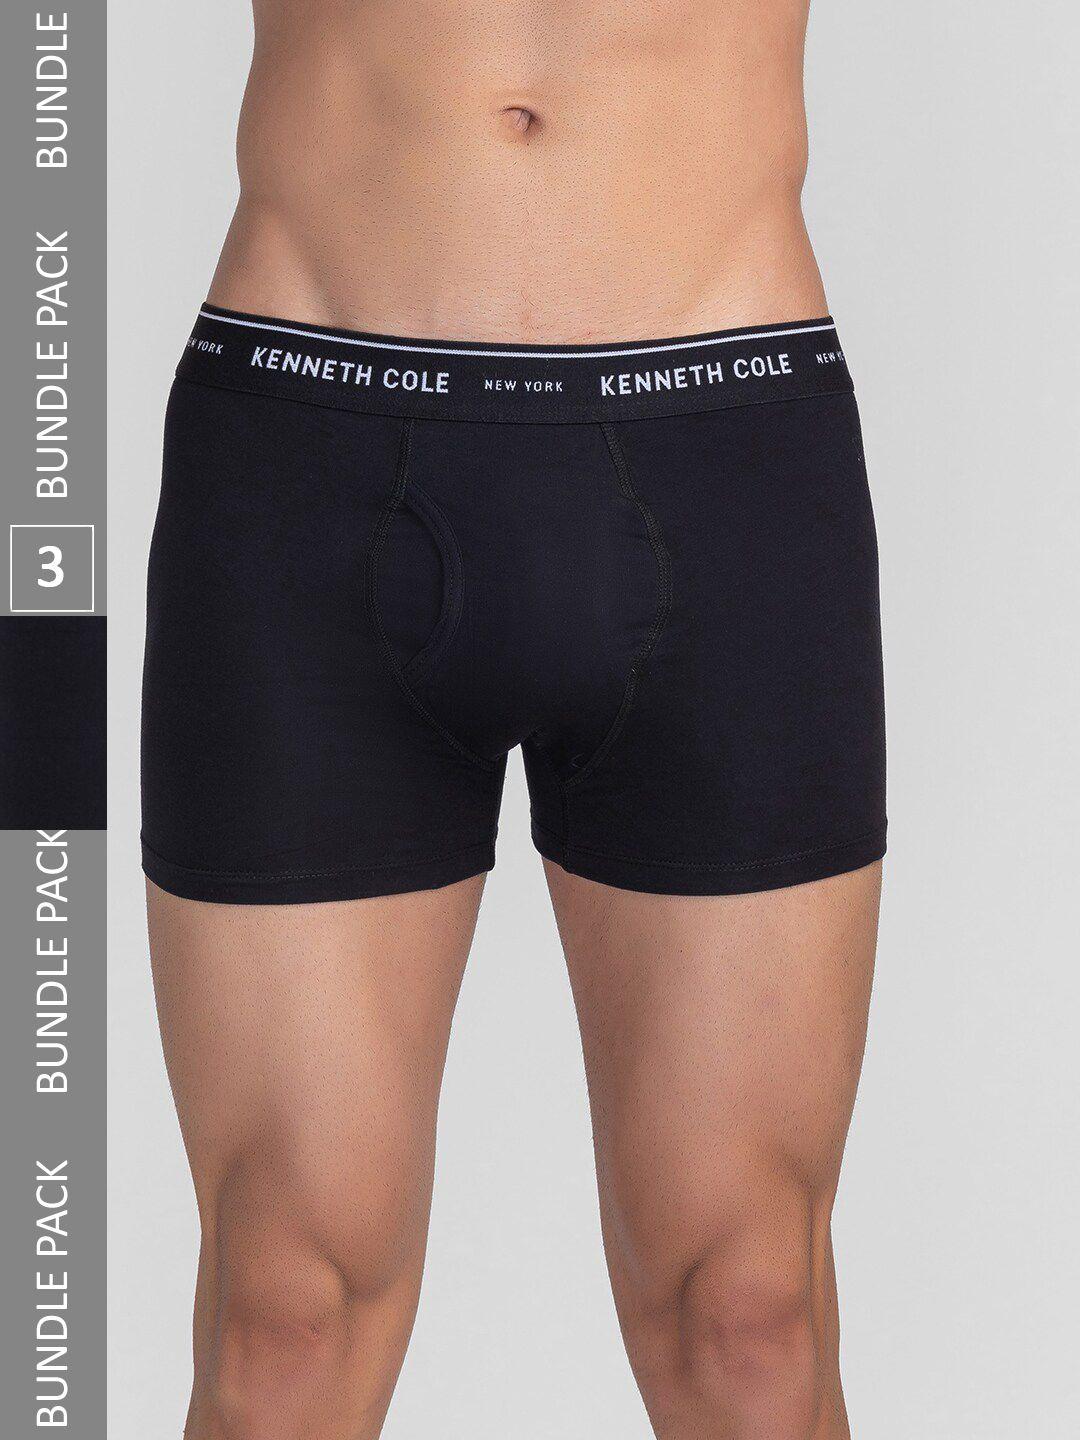 kenneth cole men pack of 3 brand logo printed waistband outer elasticated trunks